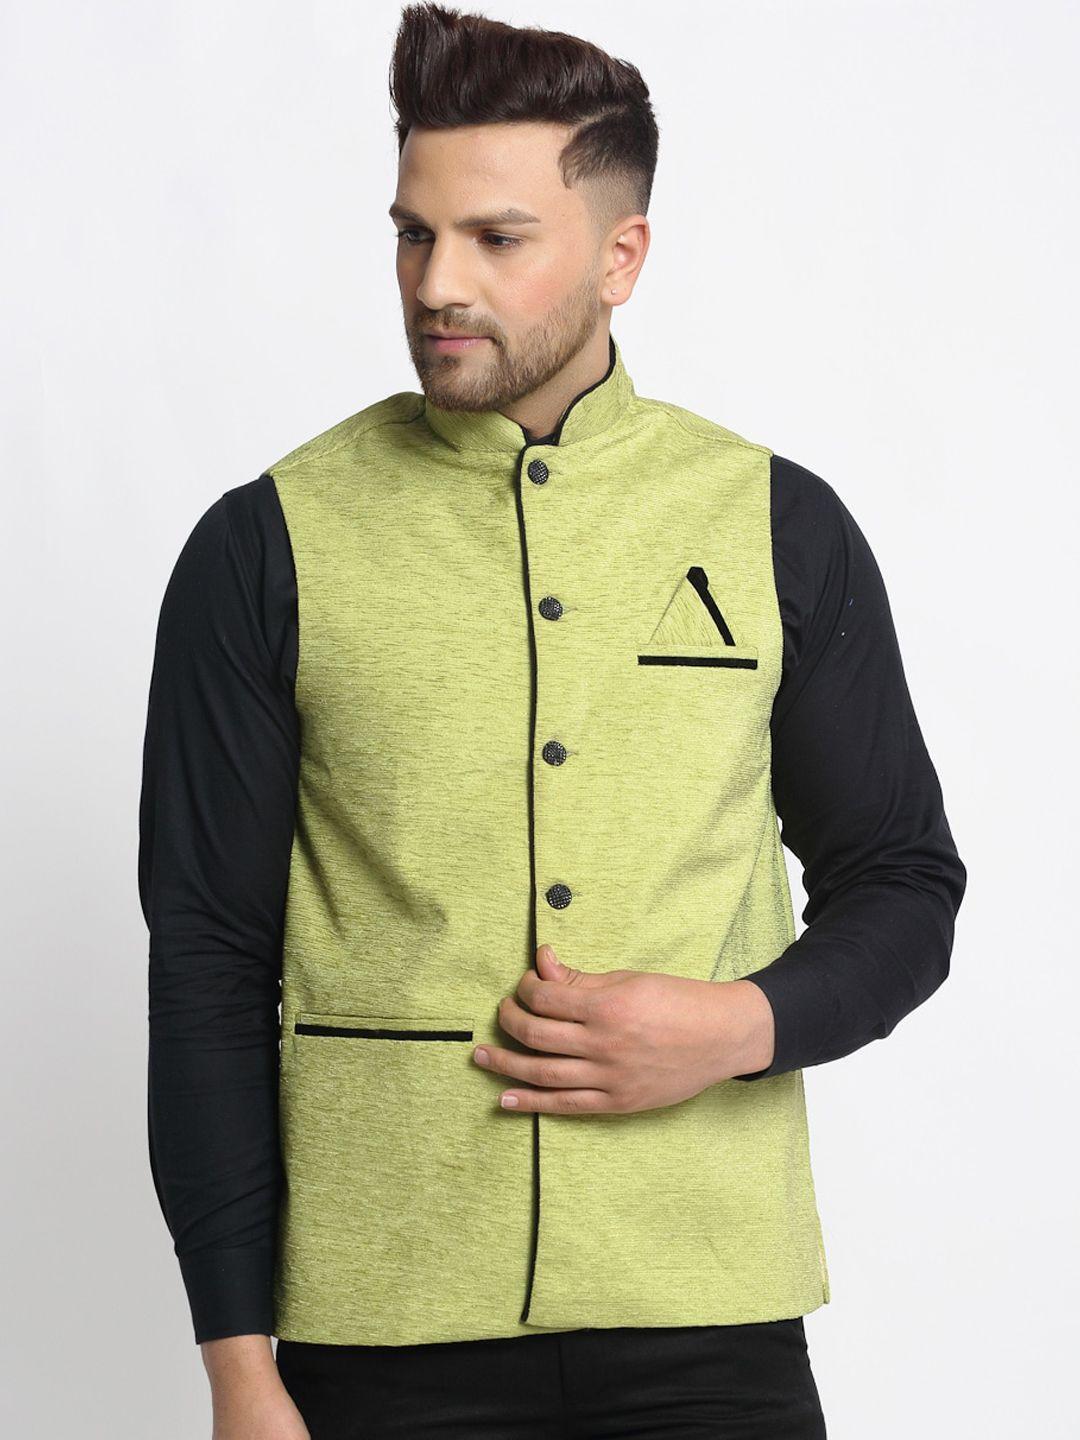 jompers men lime green solid waistcoat with black detailing and pocket square